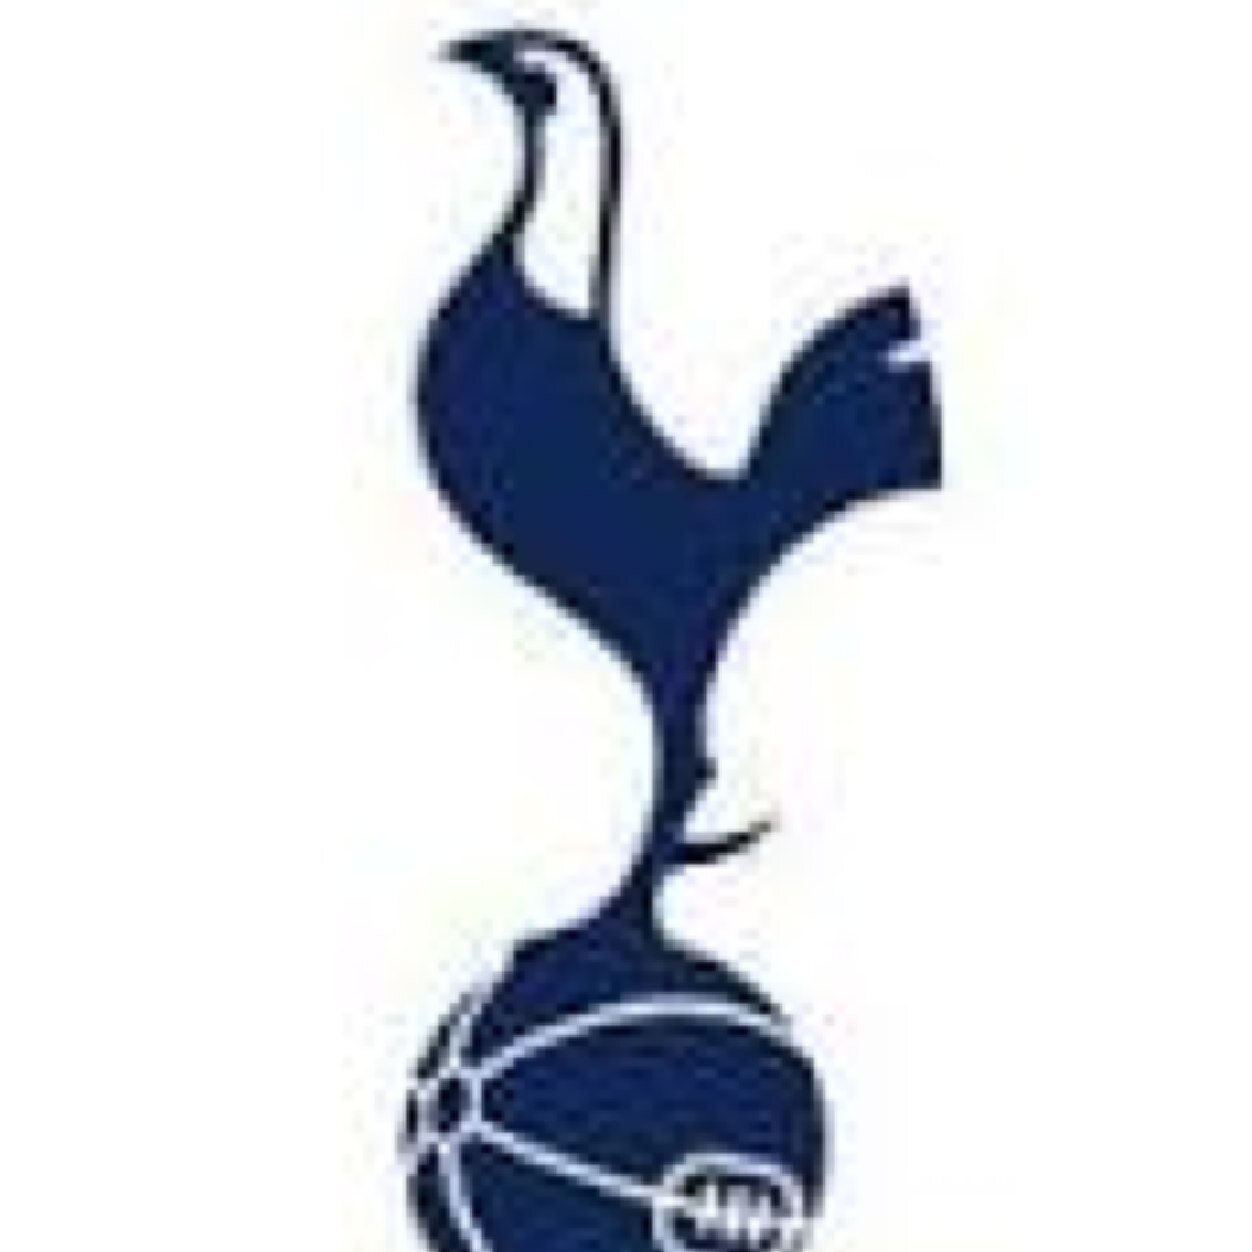 Tottenham home and away since 1990. #THFC #COYS #YIDS